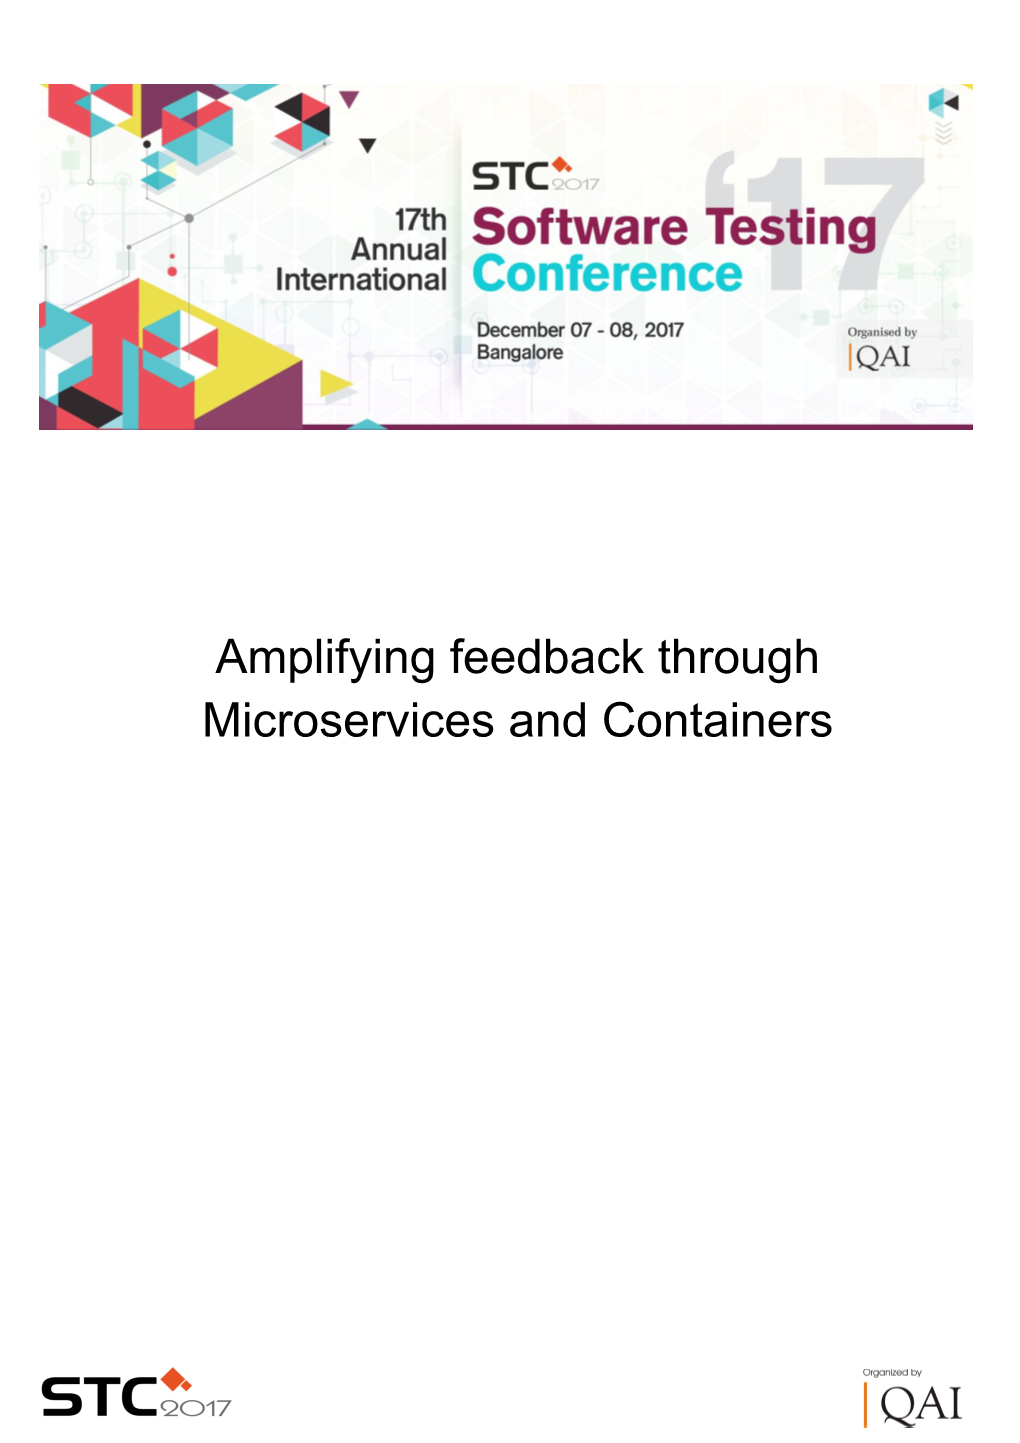 Amplifying Feedback Through Microservices and Containers